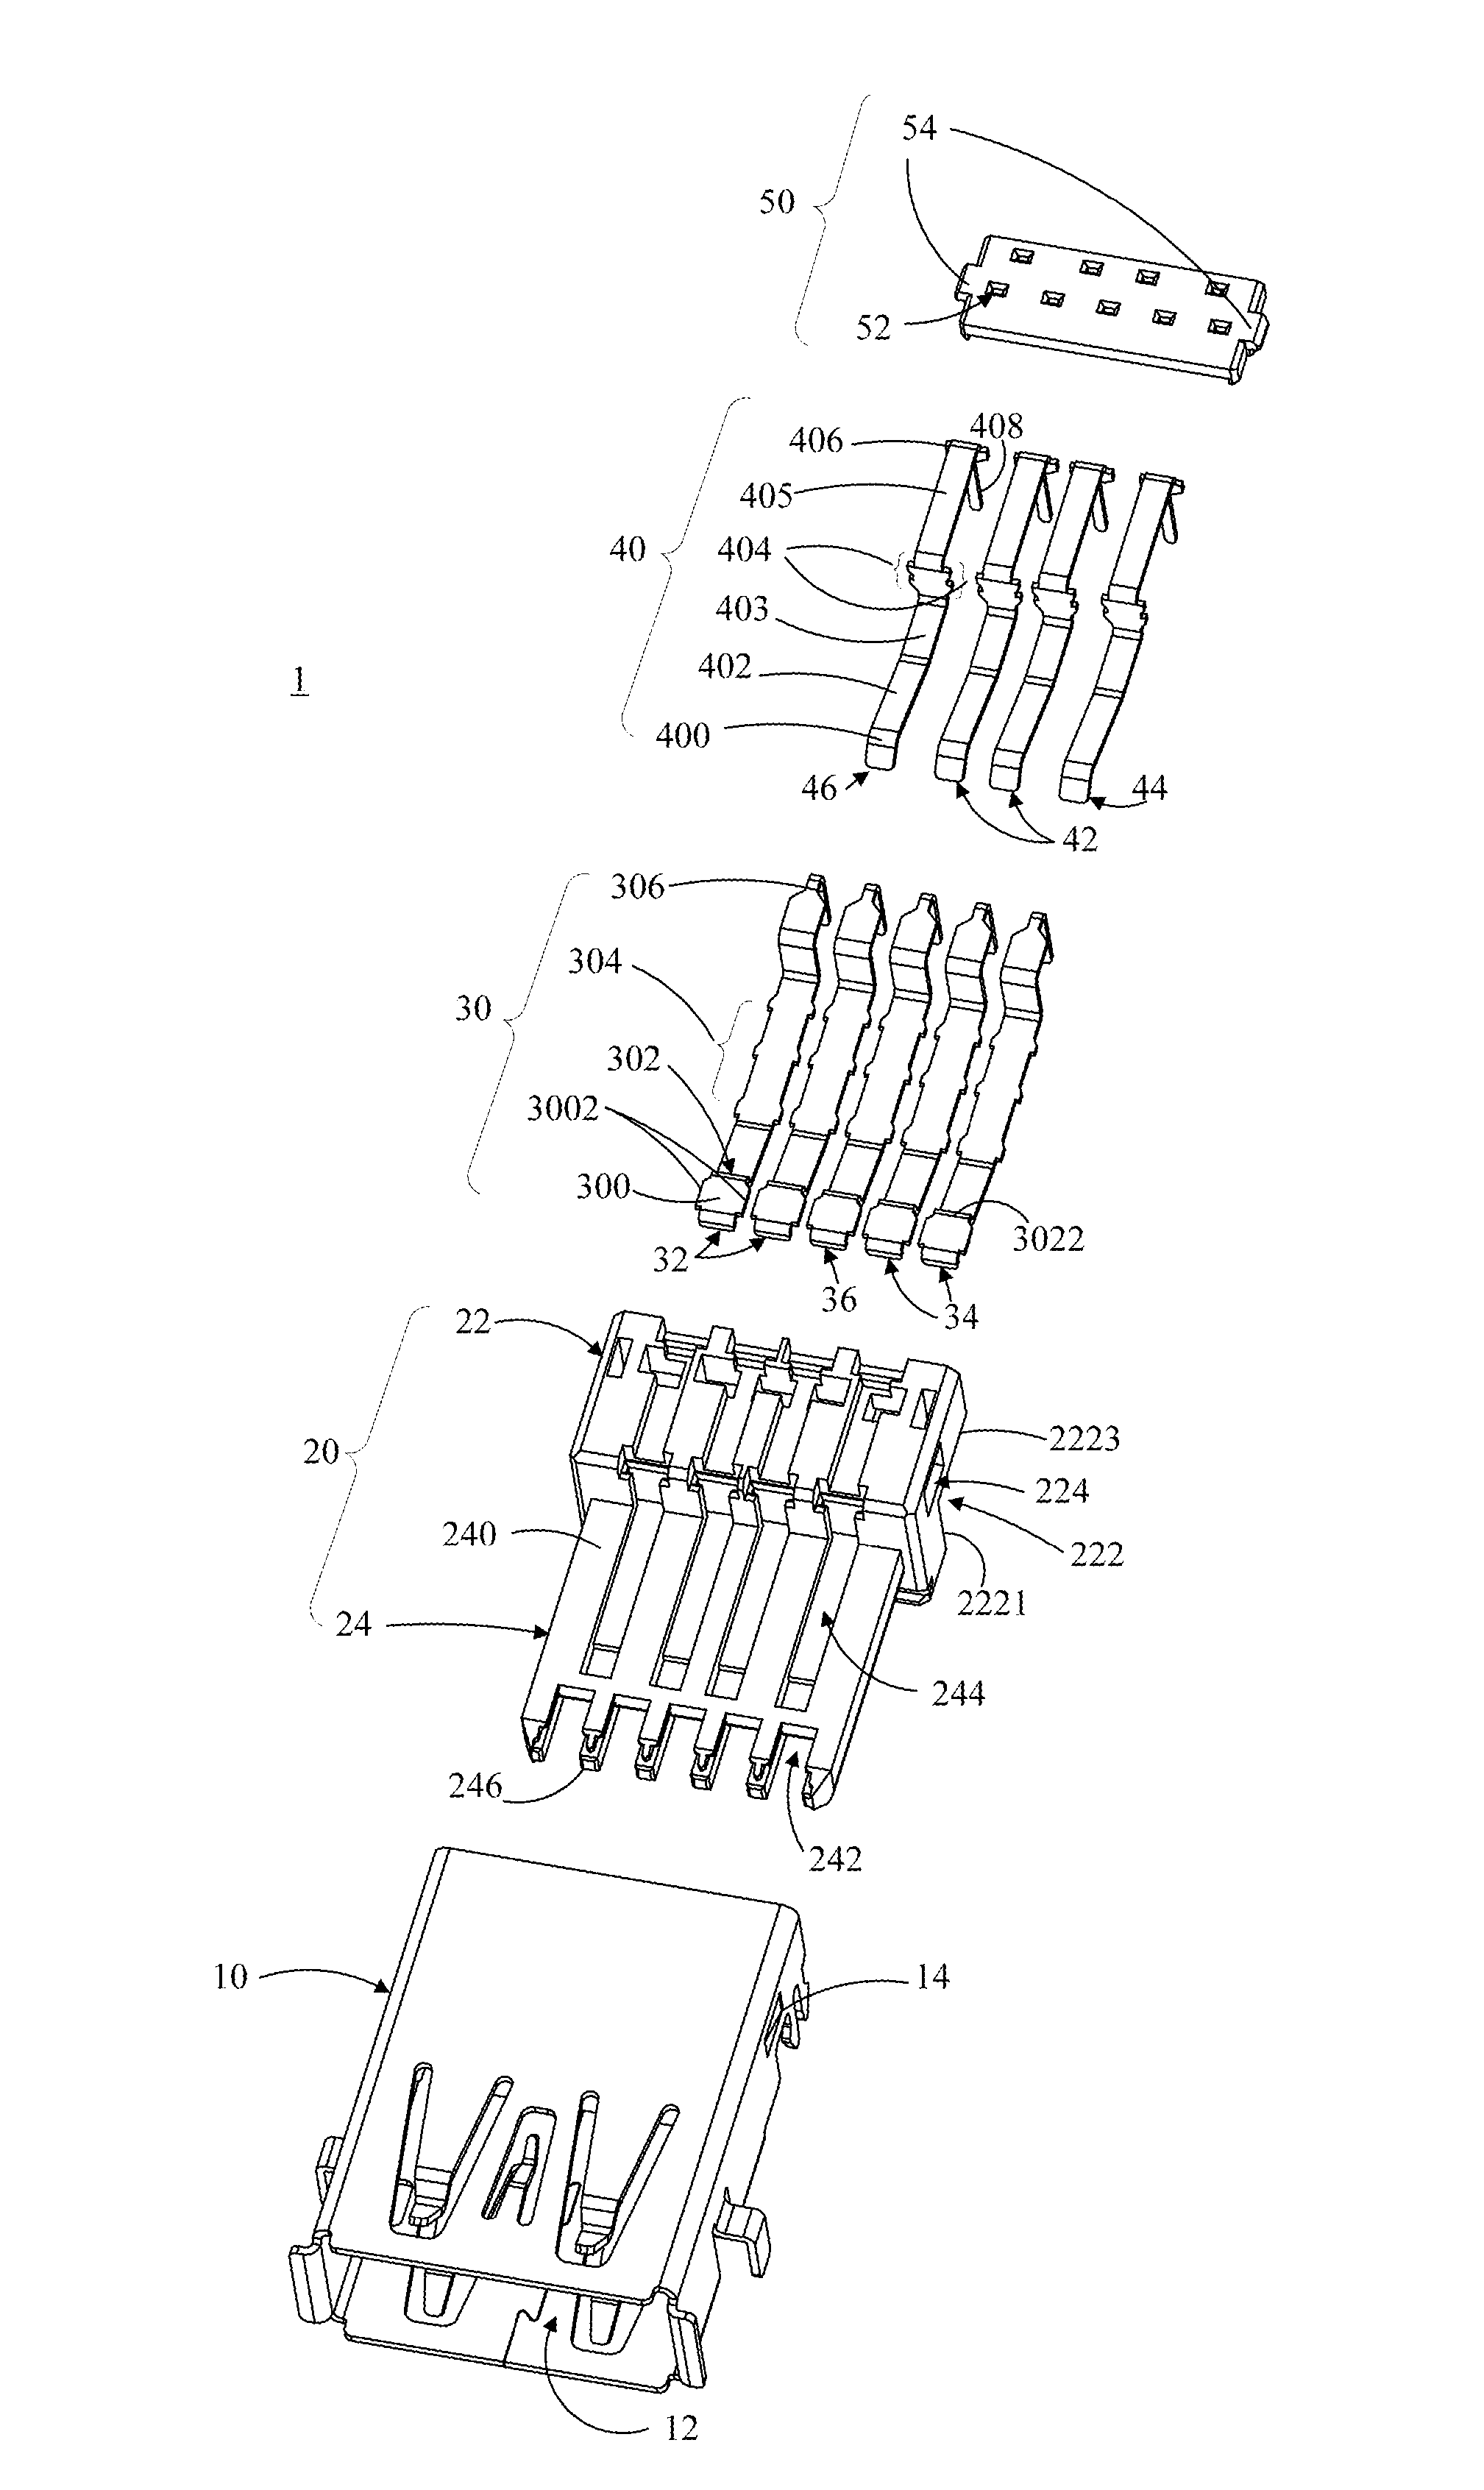 Electrical connector, electronic apparatus using the same, and assembling method of the electrical connector